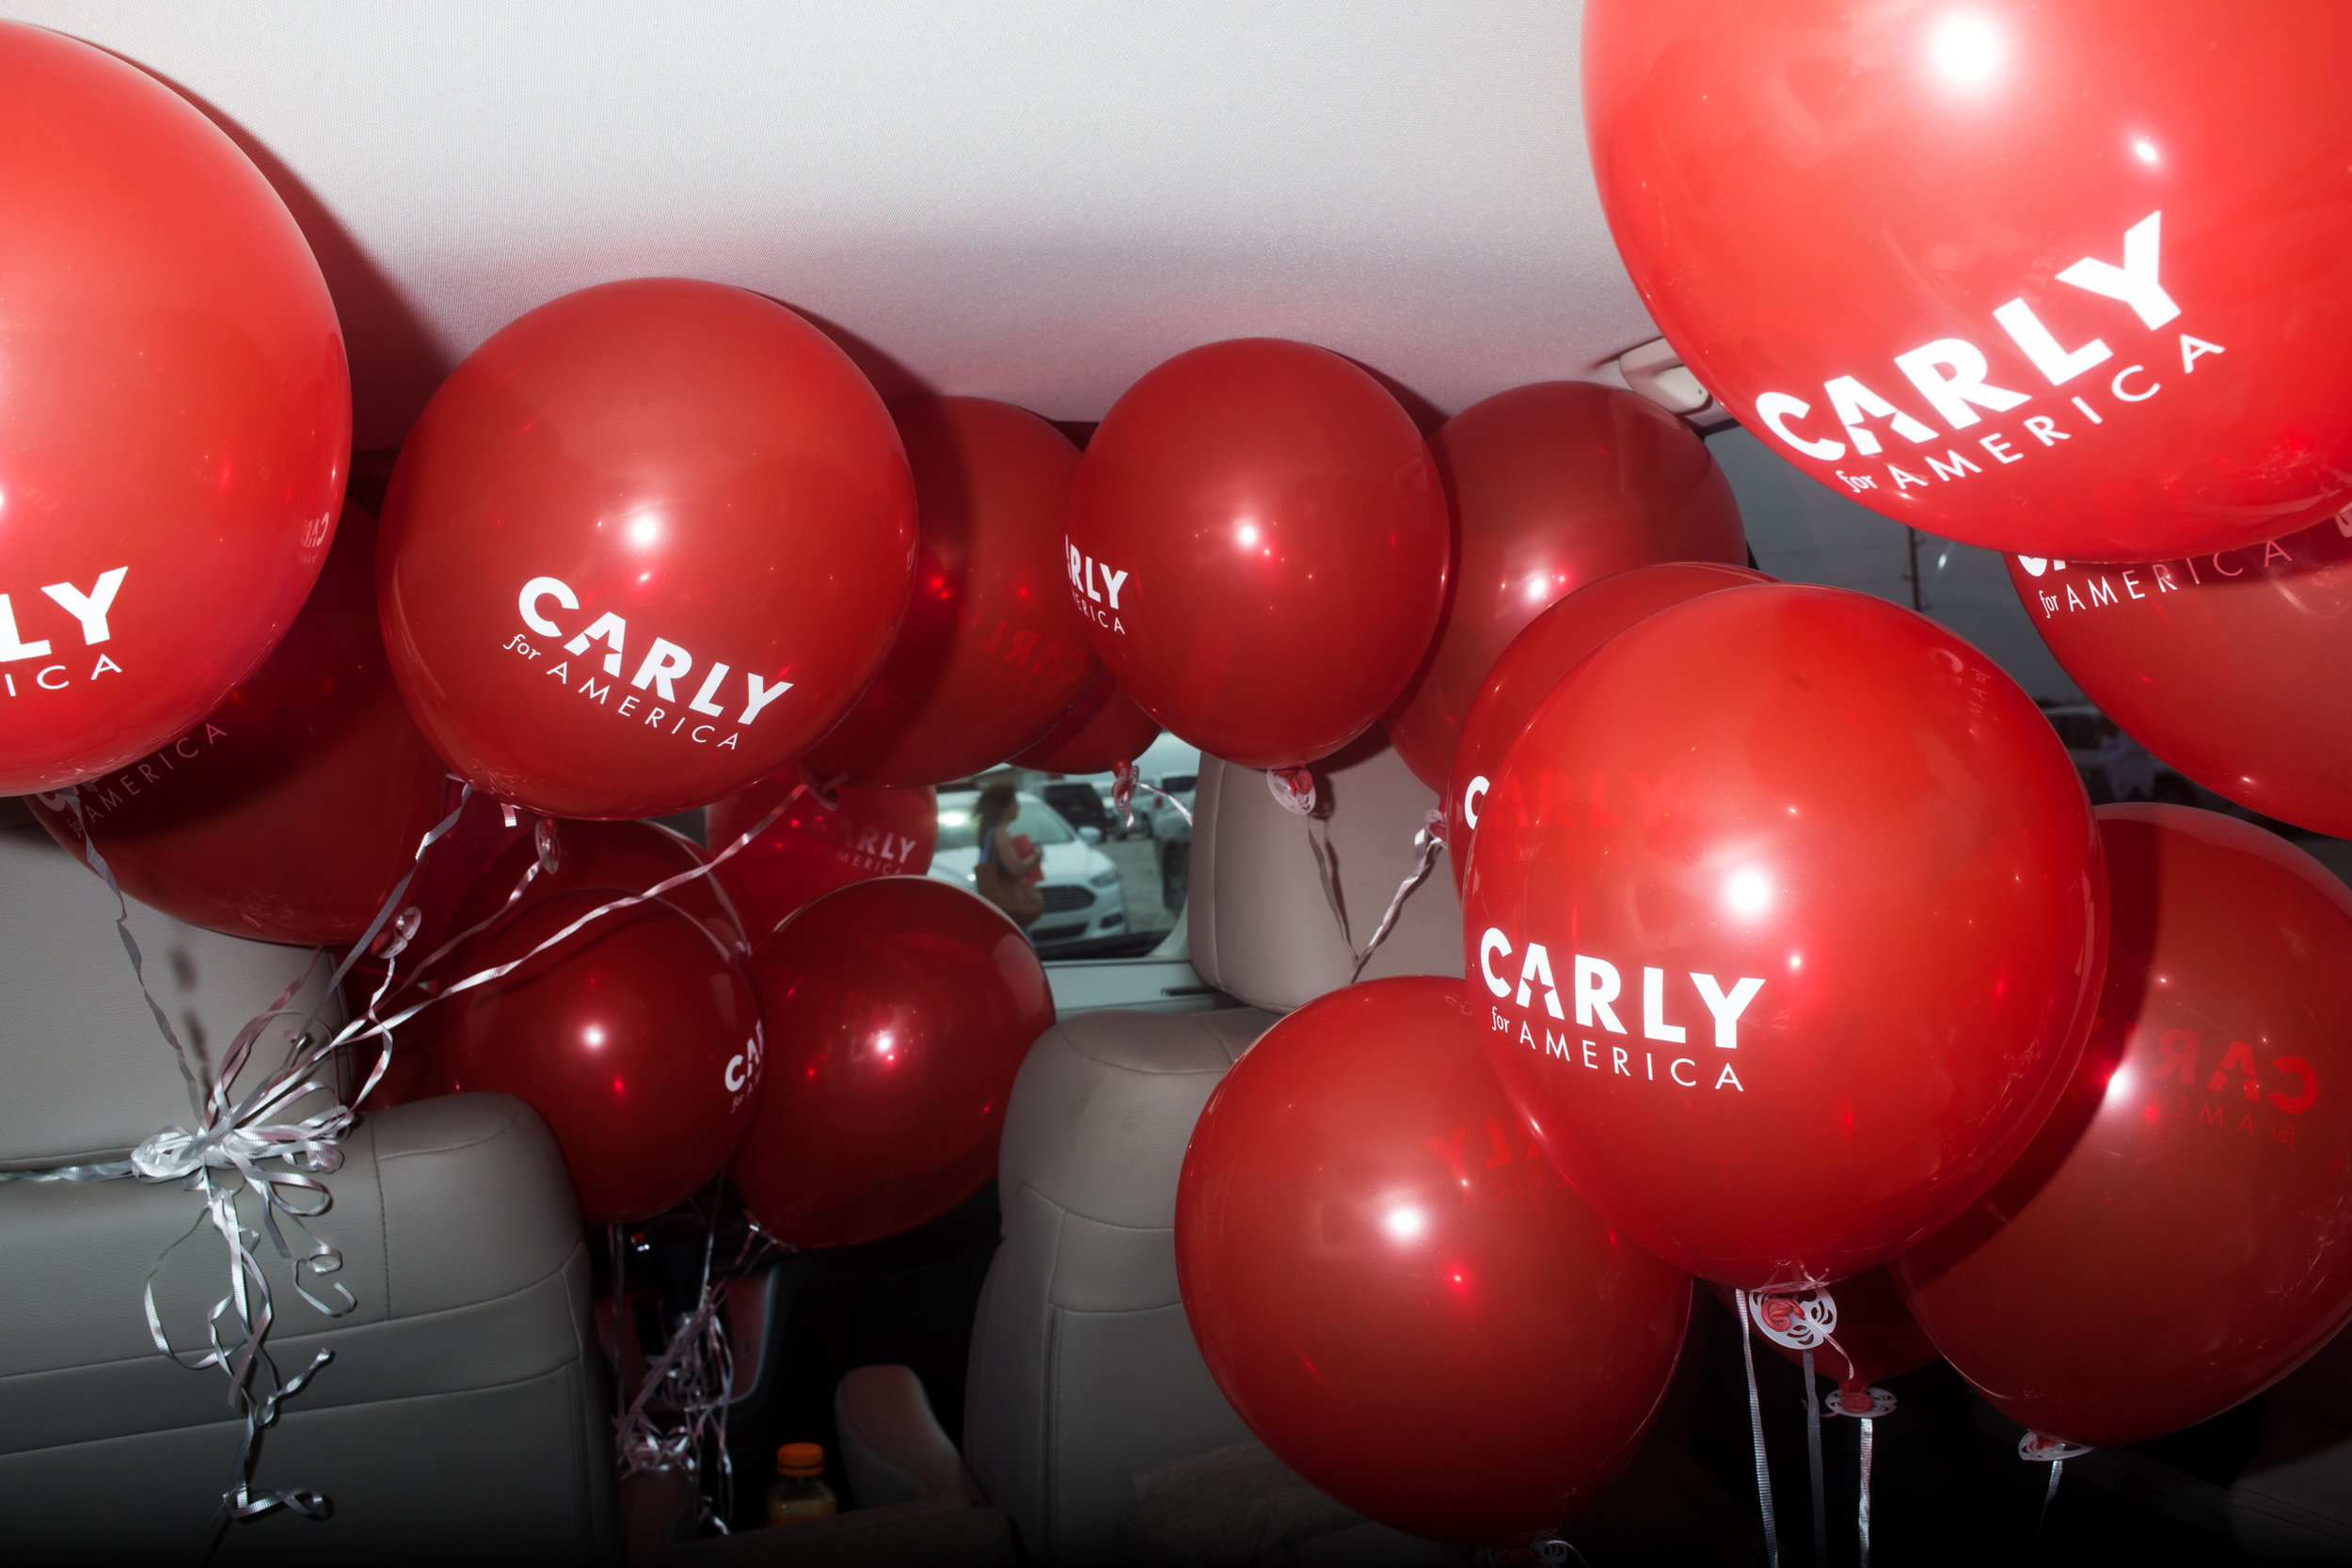  Carly Fiorina balloons fill the inside of a car at Senator Joni Ernst's First Annual Roast &amp; Ride on June 6, 2015 in Boone, Iowa.  